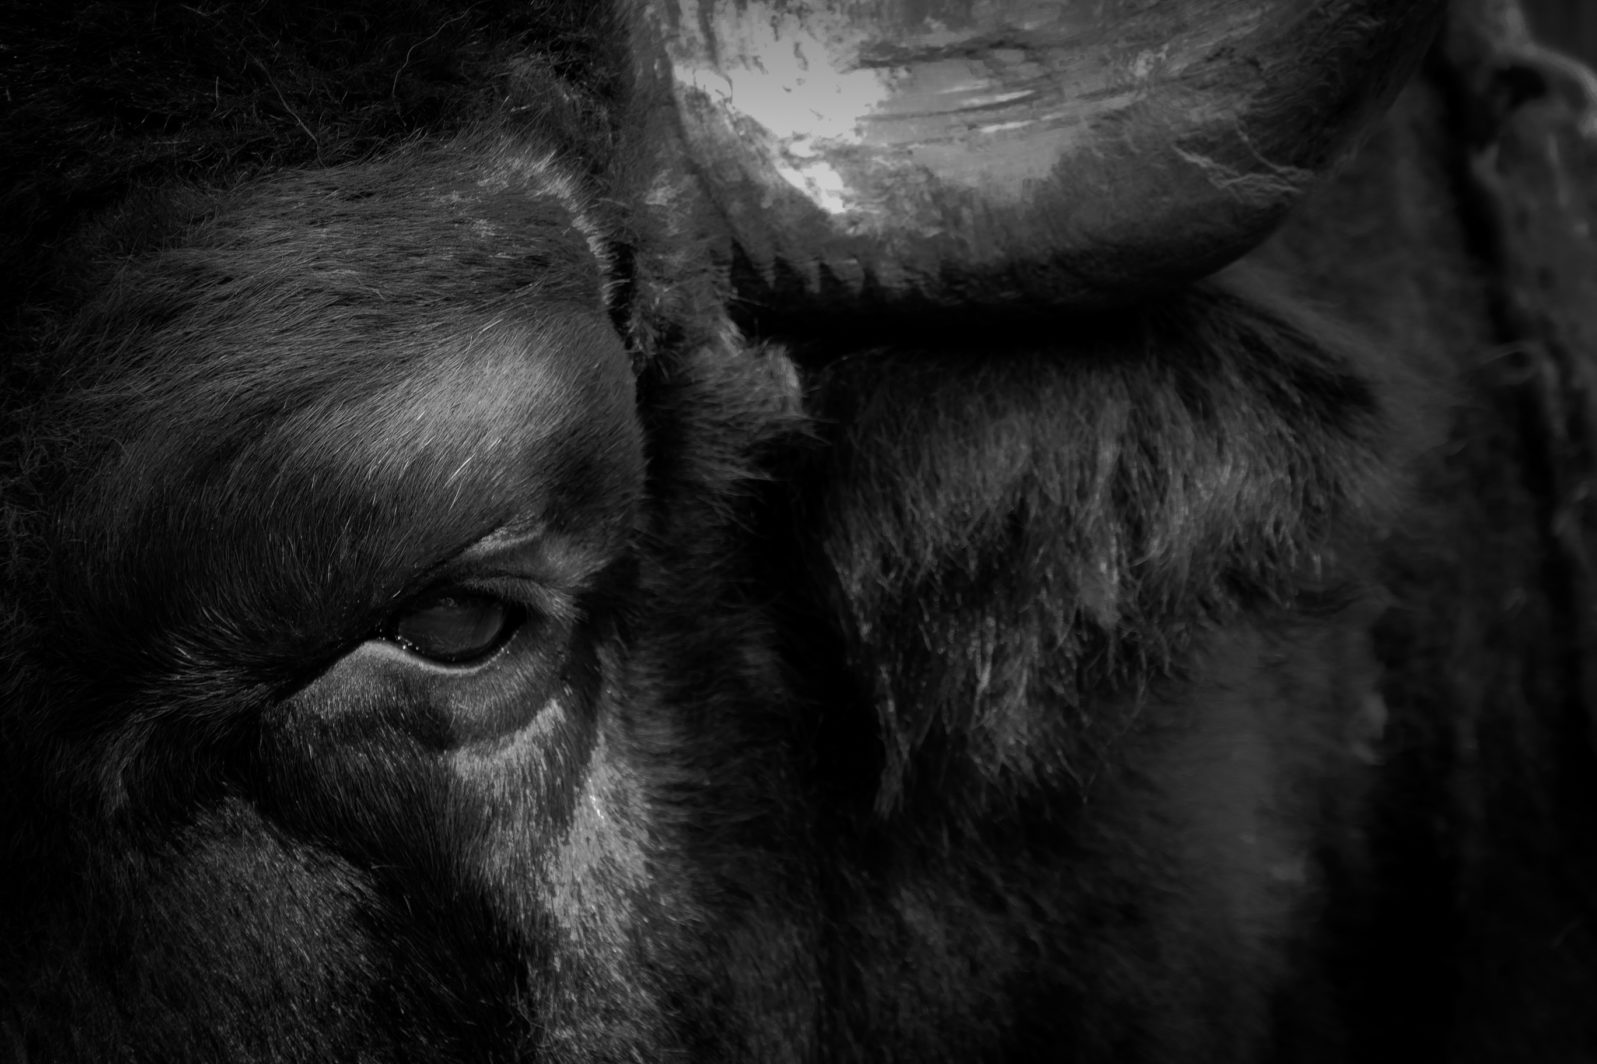 Bull's eyes and head close-up, black and white photo of a bull.